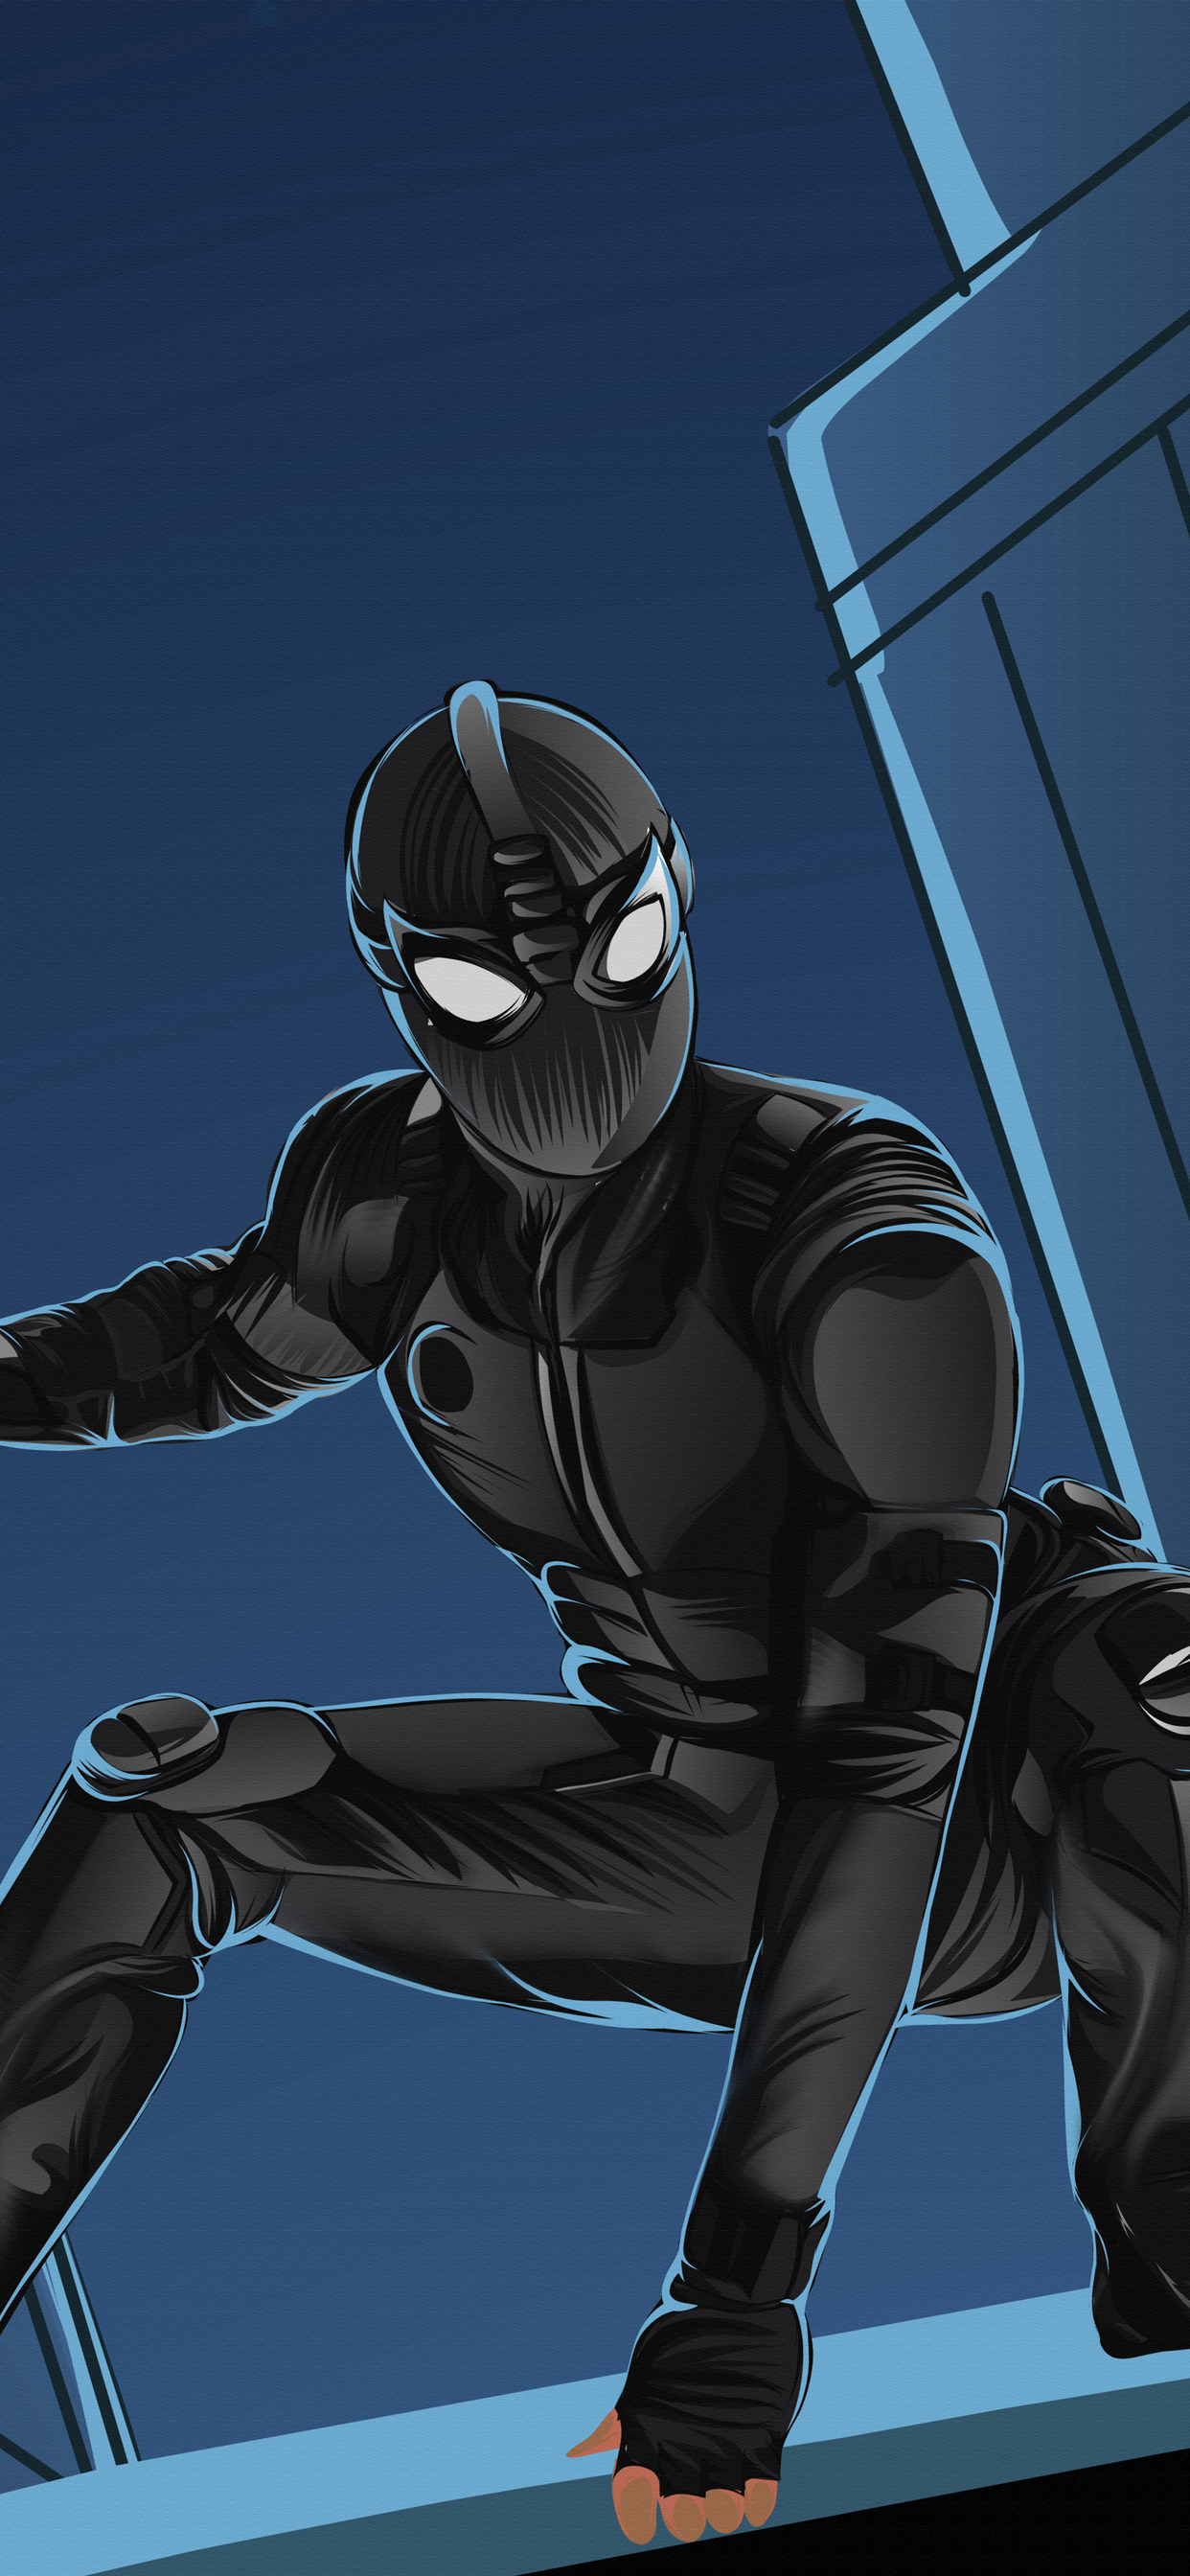 black-spider-suit-in-spider-man-far-from-home-5s.jpg